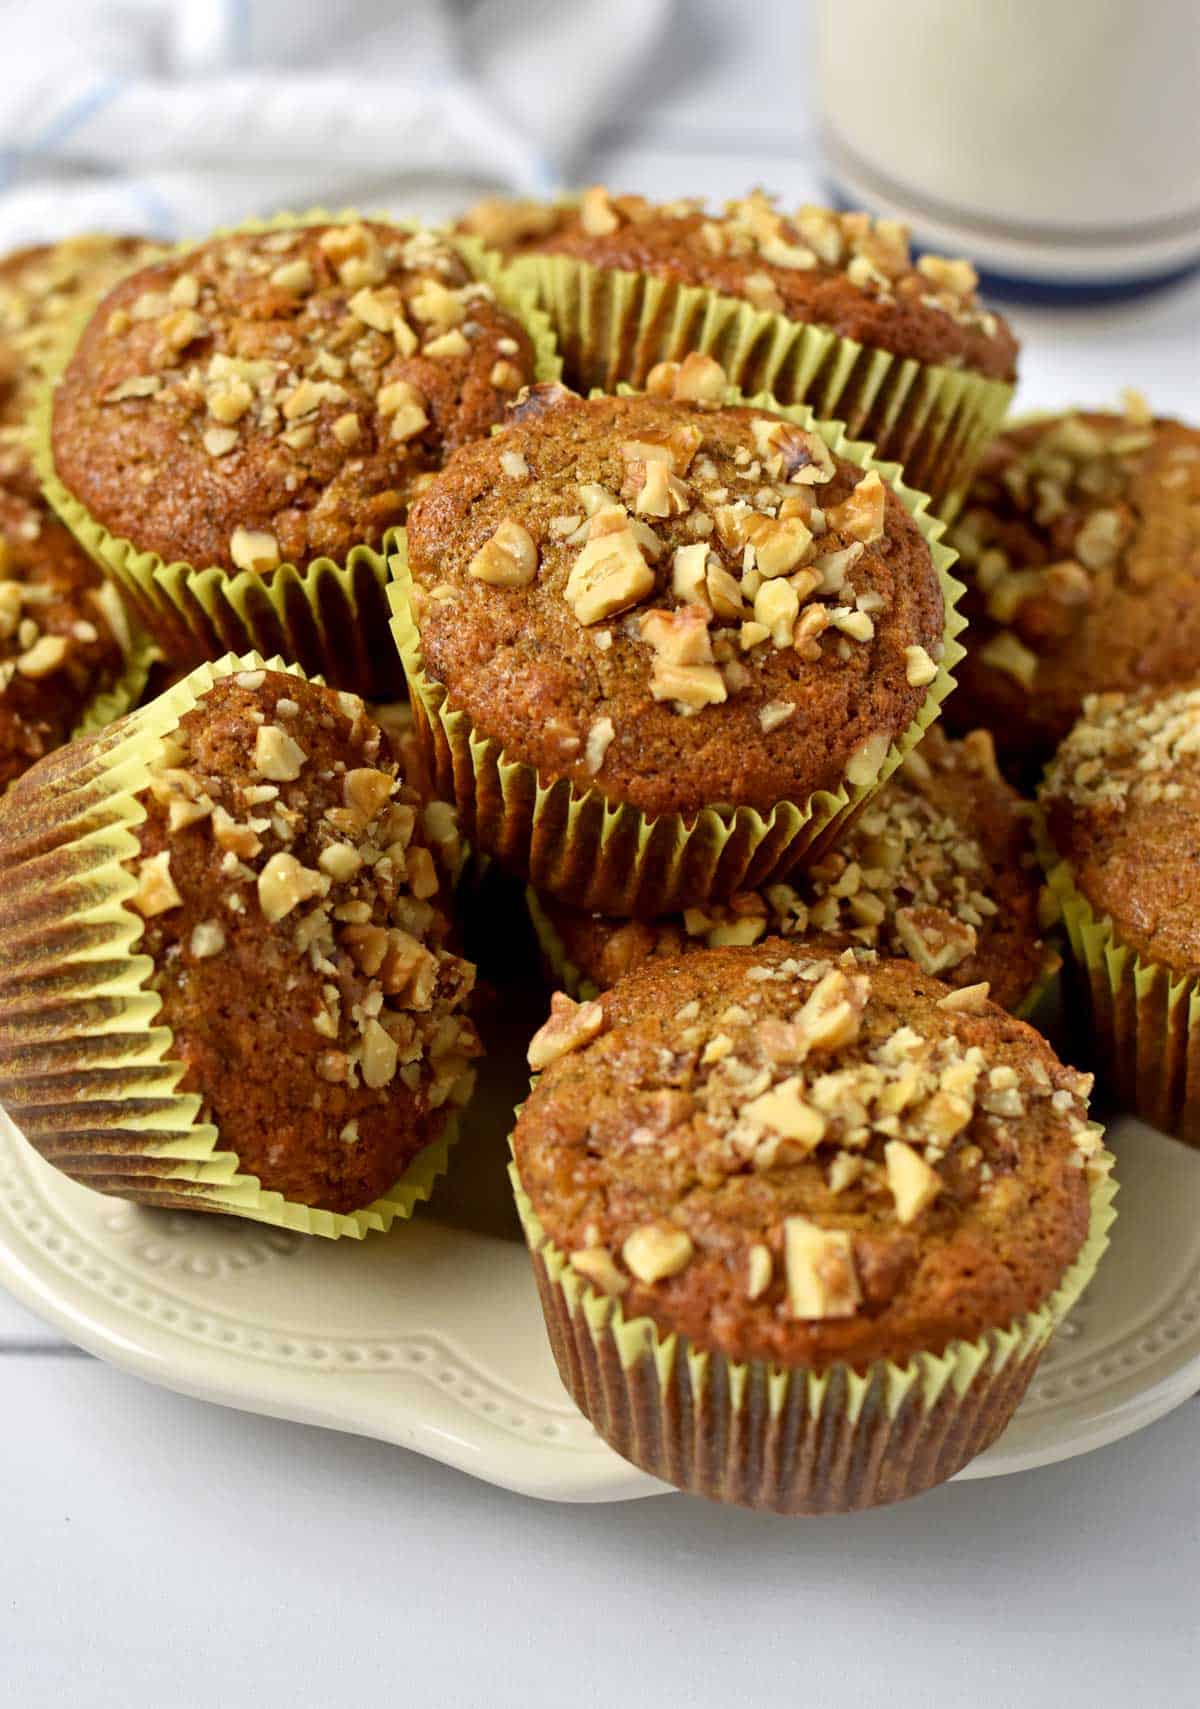 Gluten free banana nut muffins stacked on a serving plate.